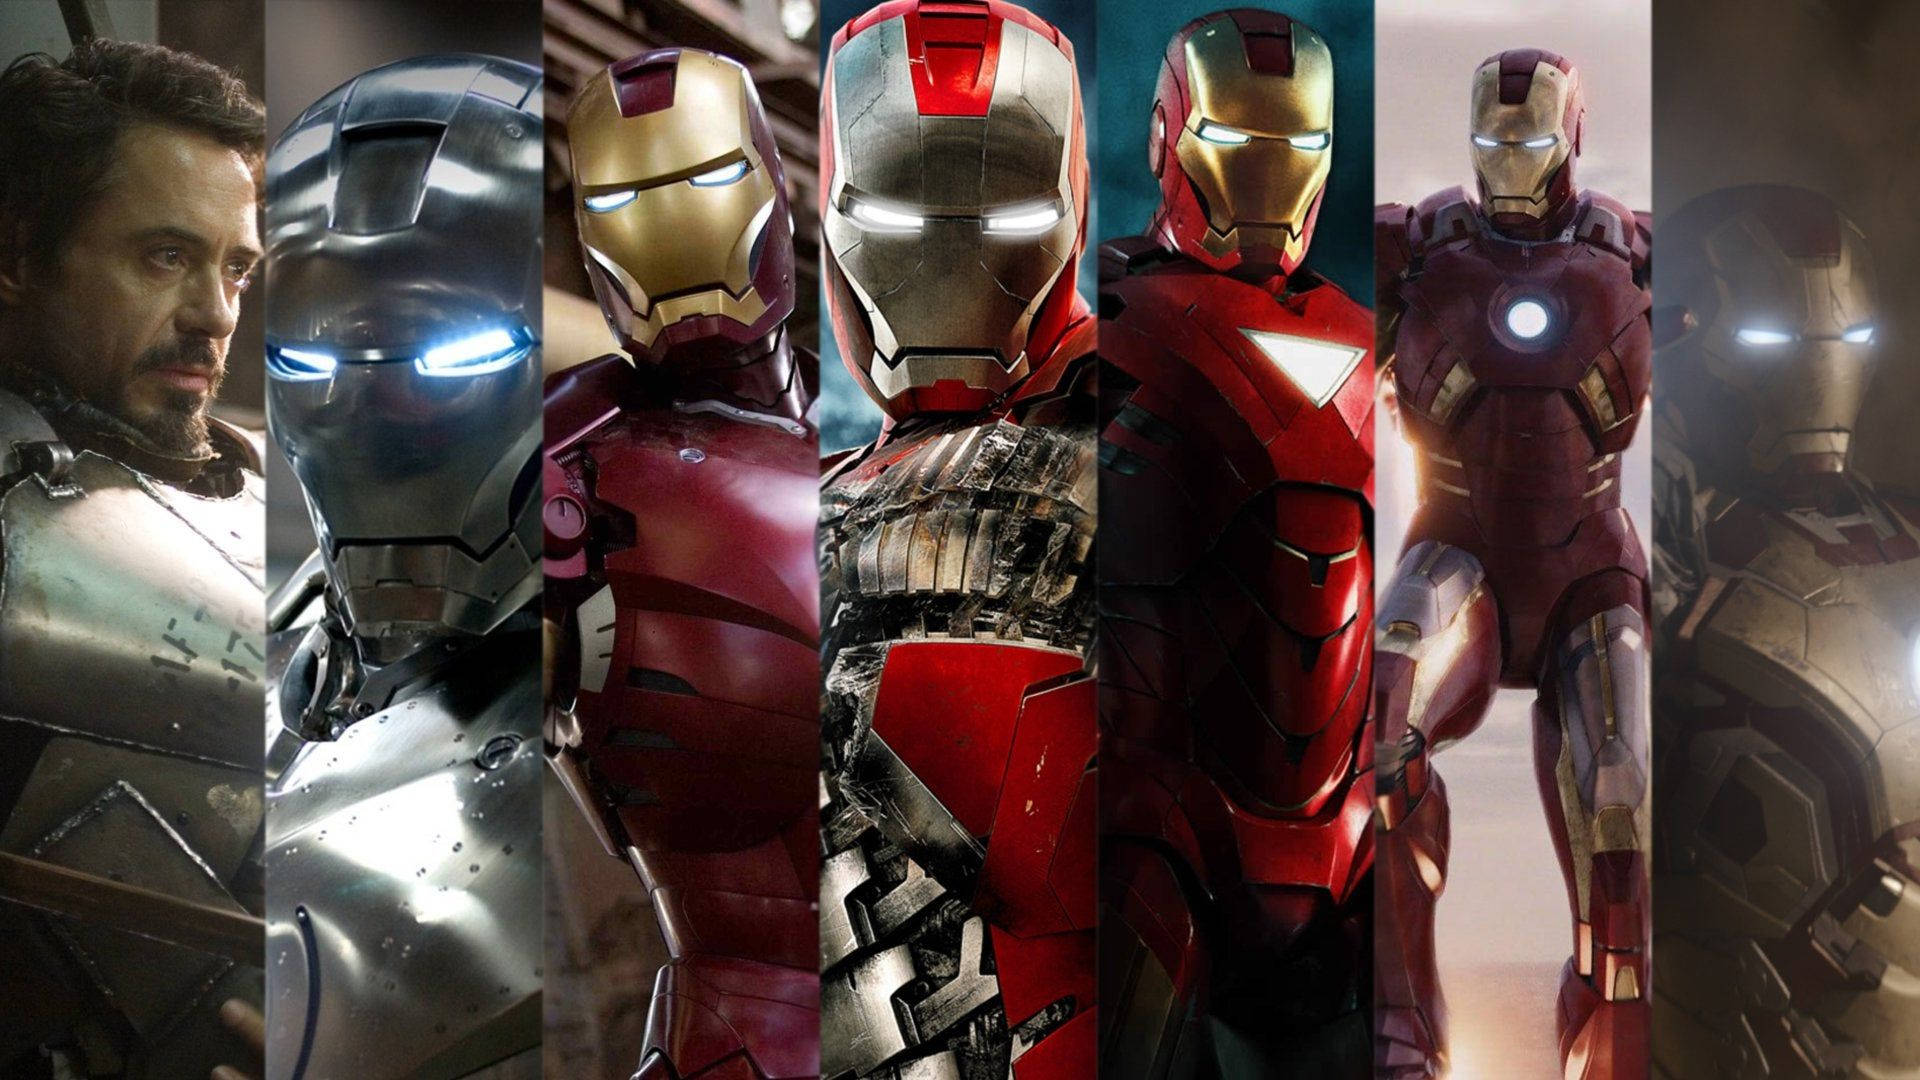 Iron Man Mark 3 standing ready to defend justice Wallpaper